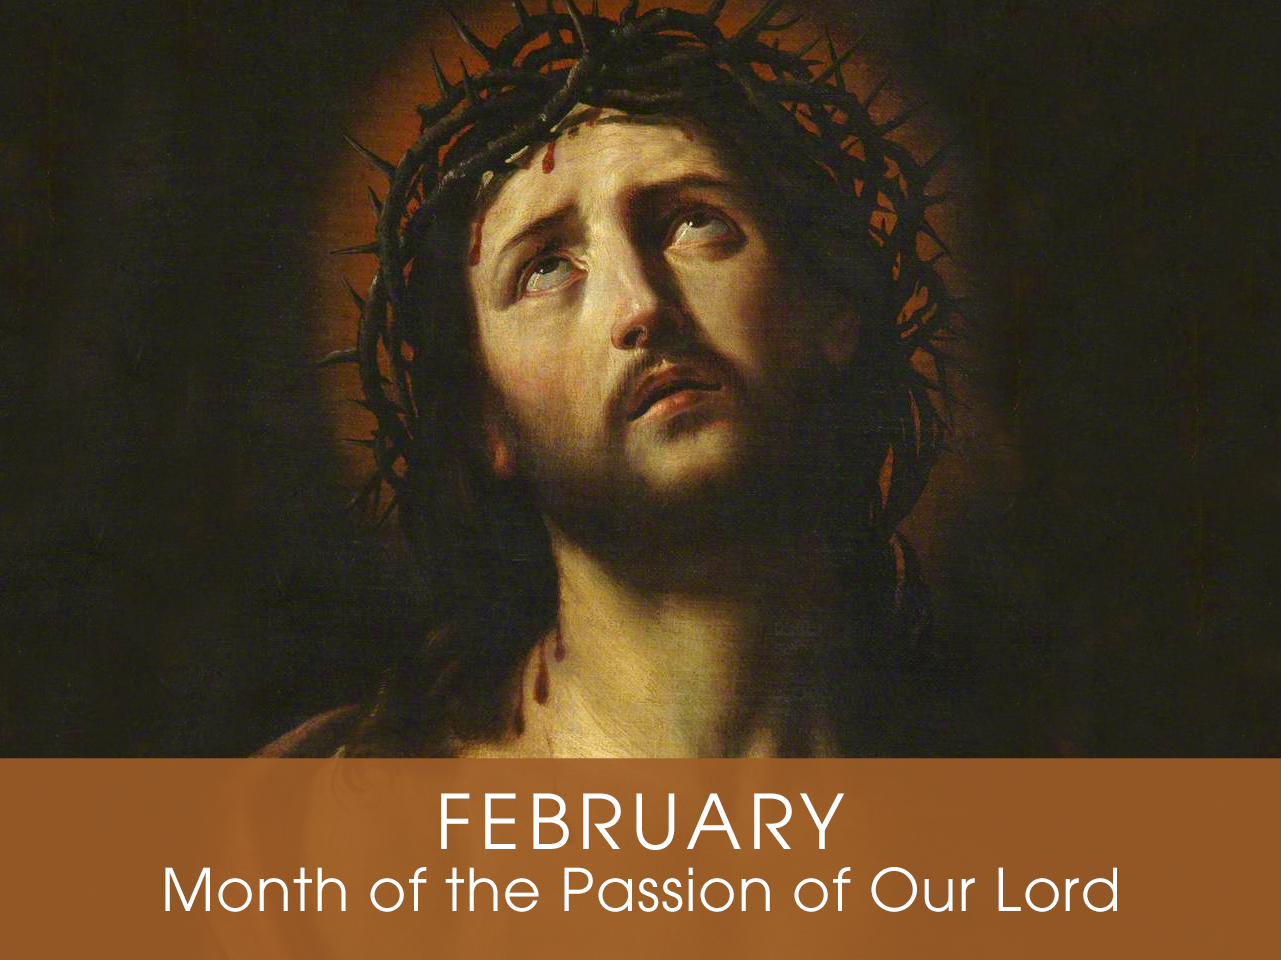 Month of the Passion